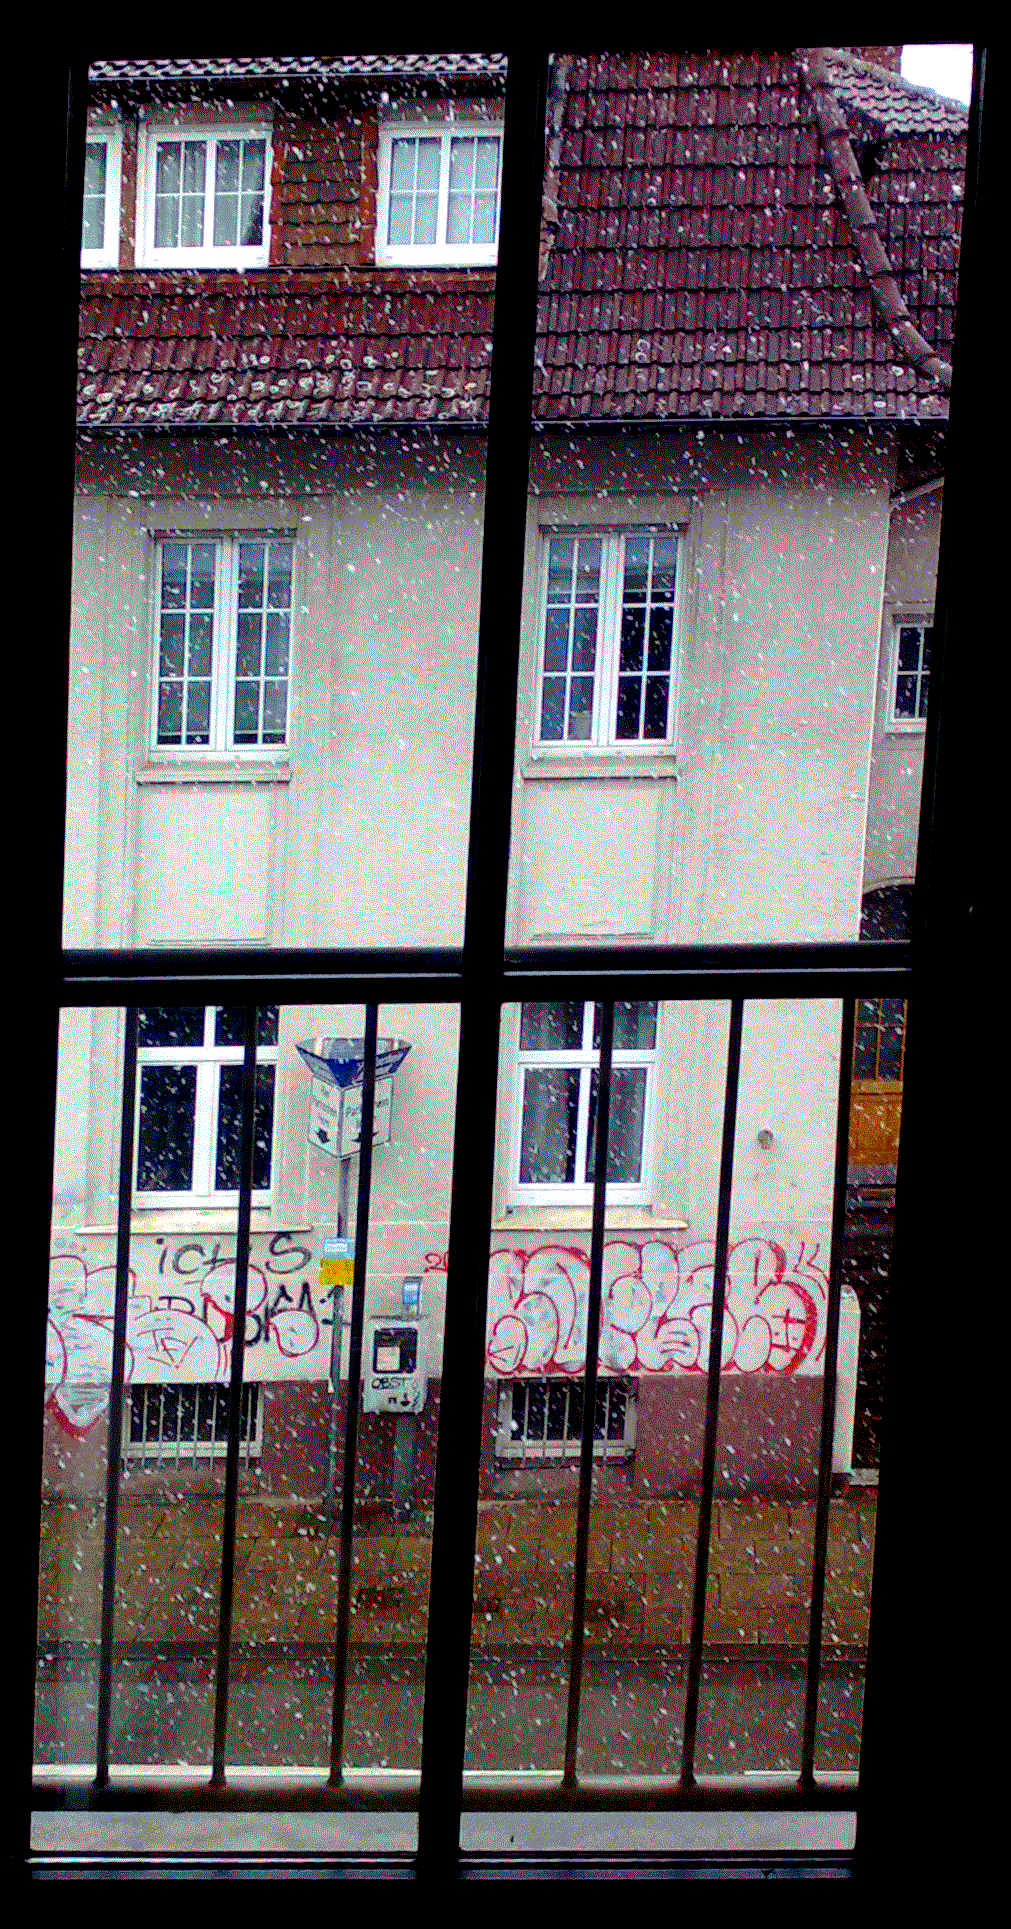 Photograph: Looking out of a window whose frame also frames the image; with metal gating in front of it, looking at a graffitied house while snowflakes grace the air